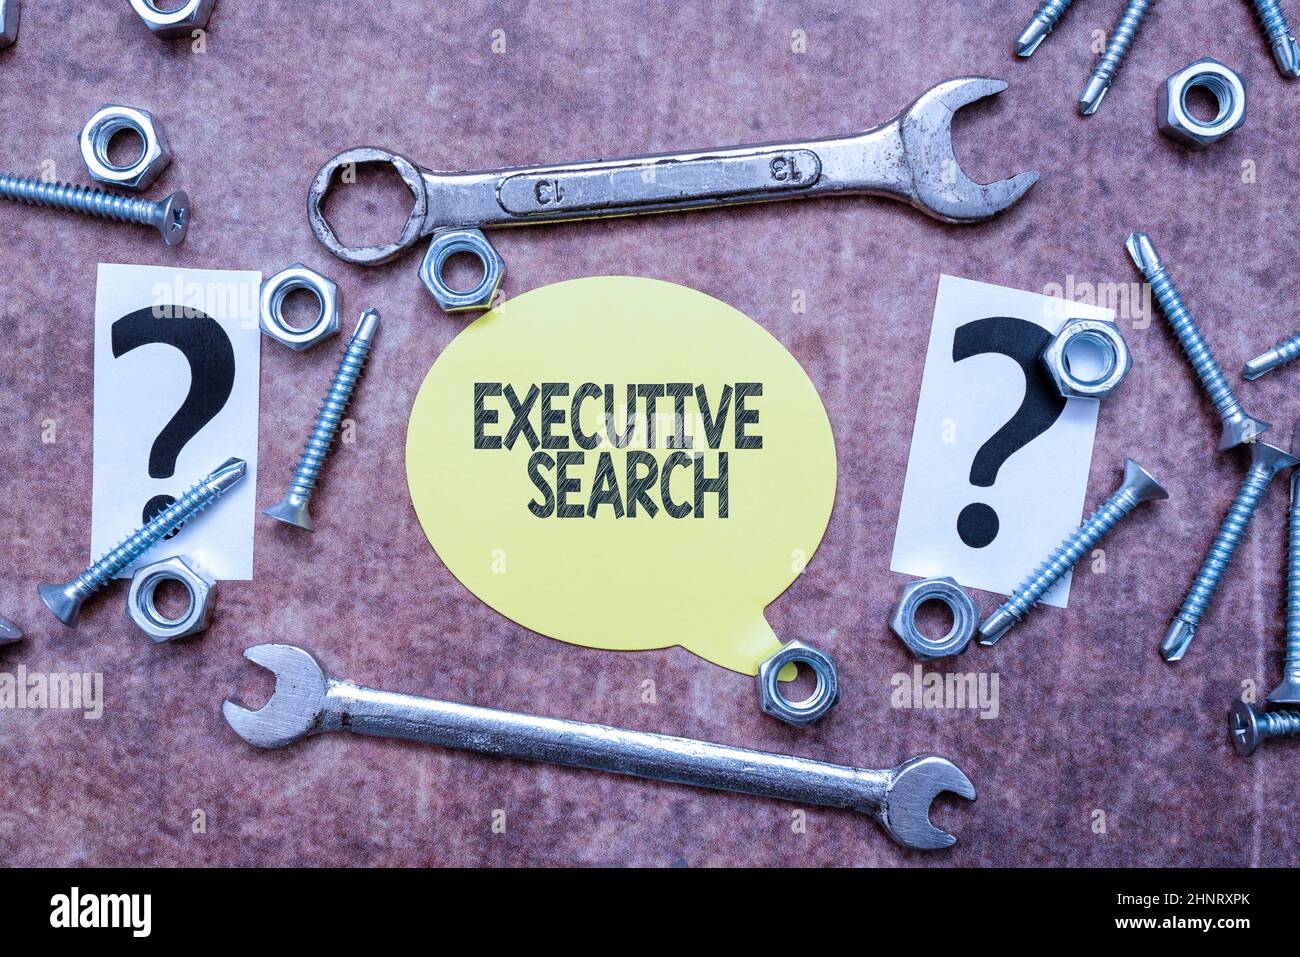 Sign displaying Executive Search. Business approach recruitment service organizations pay to seek candidates New Ideas Brainstoming For Maintenance Planning Repairing Solutions Stock Photo